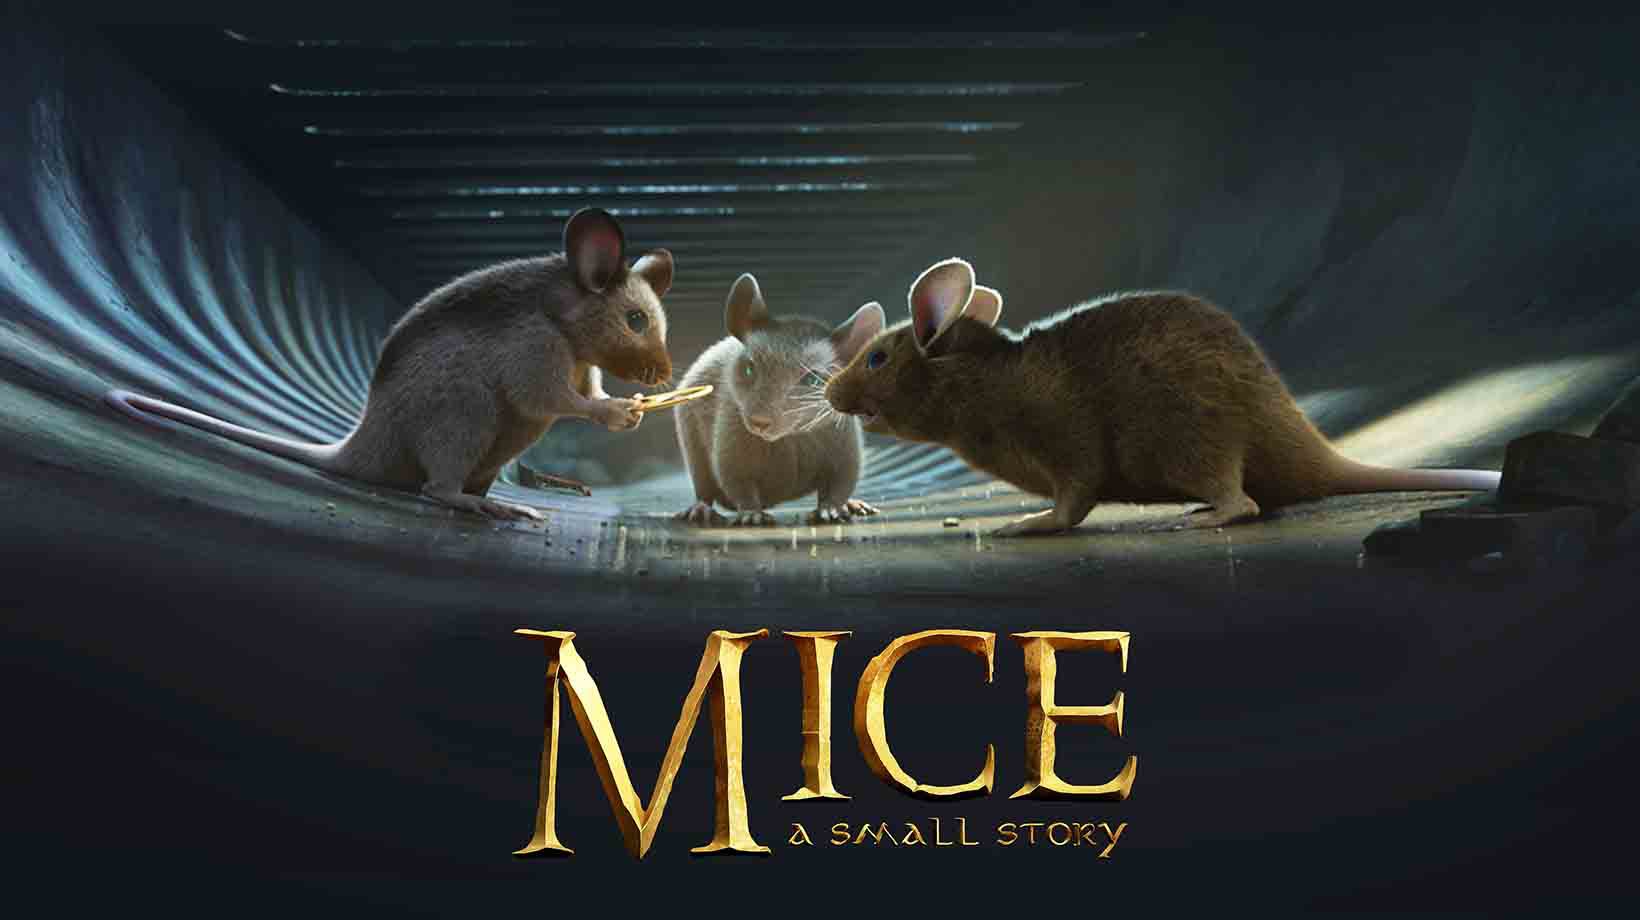 MICE, a small story